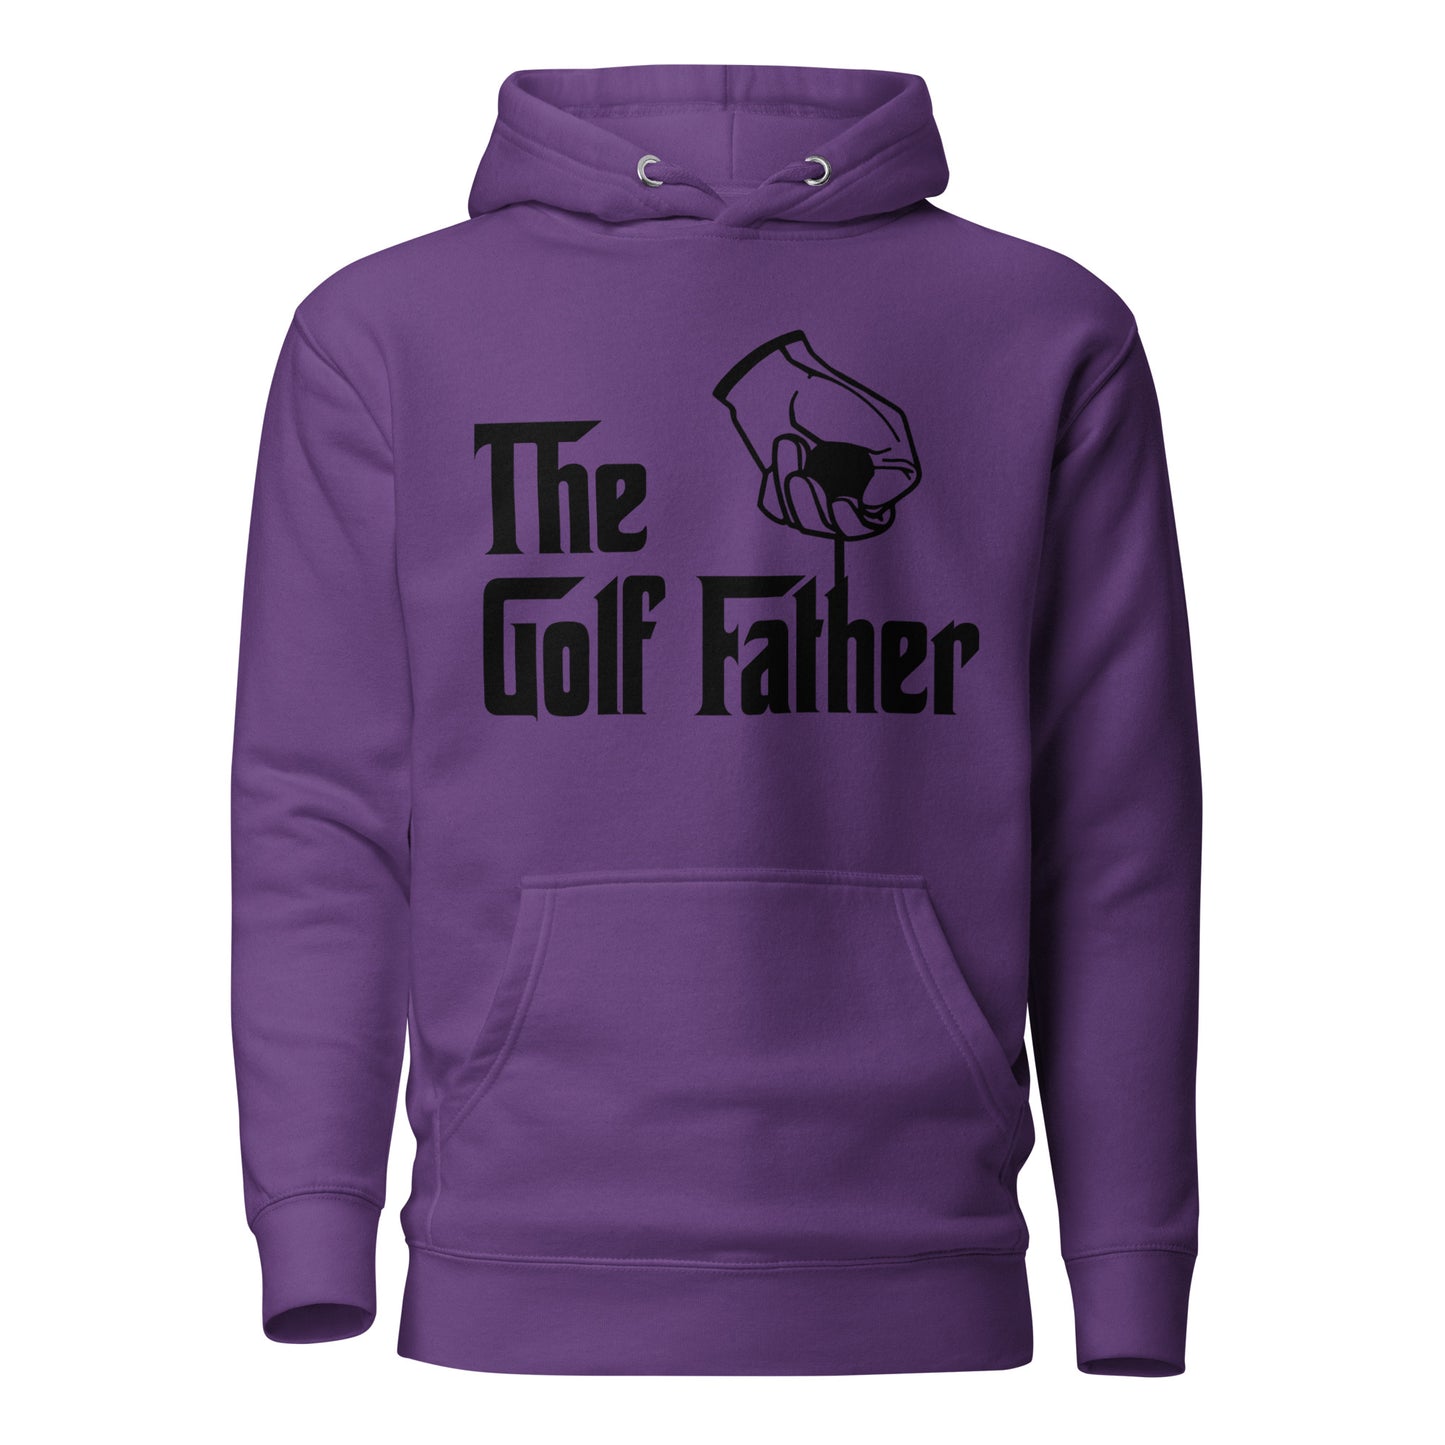 The Golf Father Premium Hoodie